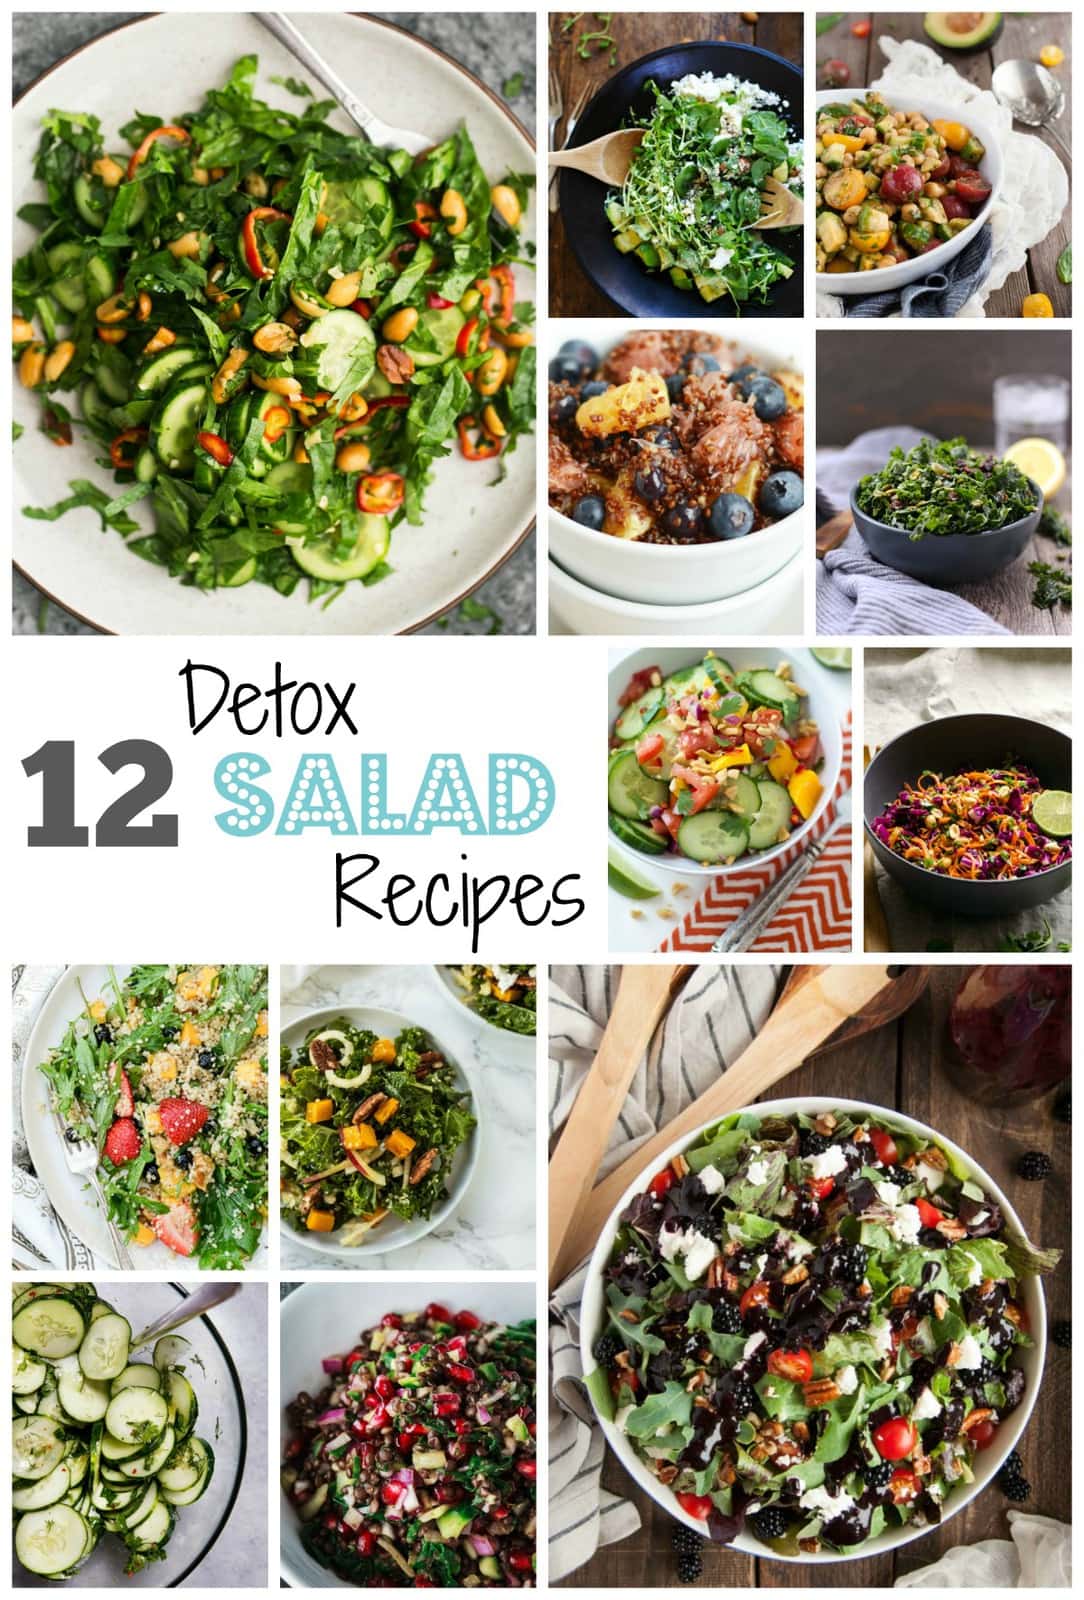 12 delicious detox salad recipes to help lighten up your diet and your life. Each salad is vegetarian so take a break from the meat and embrace the detox!